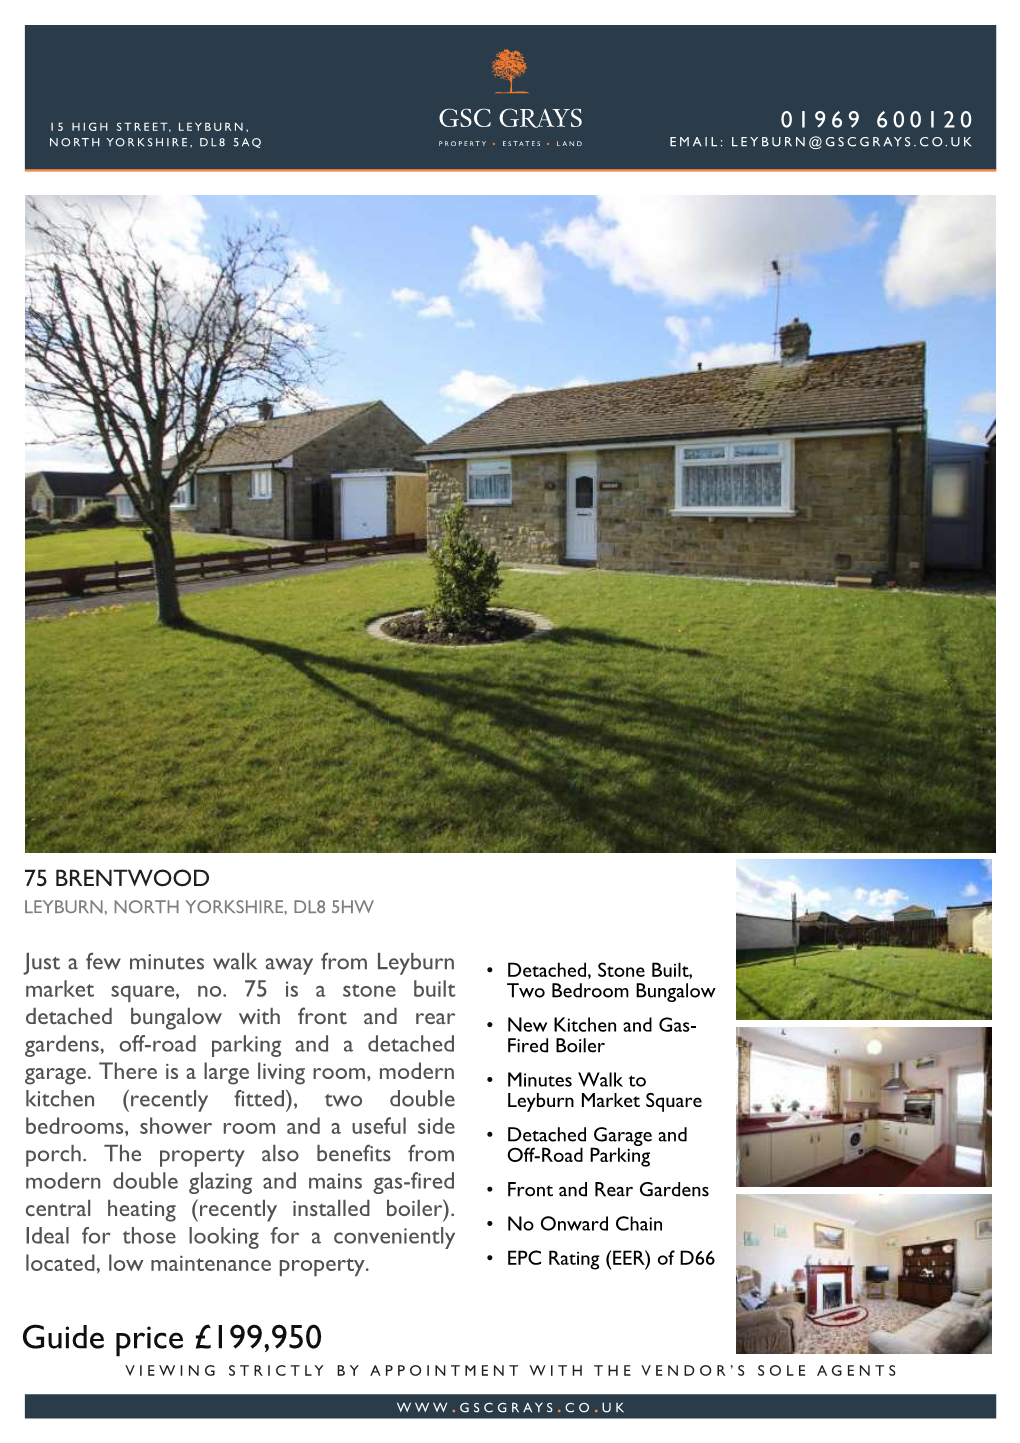 Guide Price £199,950 VIEWING STRICTLY by APPOINTMENT with the VENDOR’S SOLE AGENTS